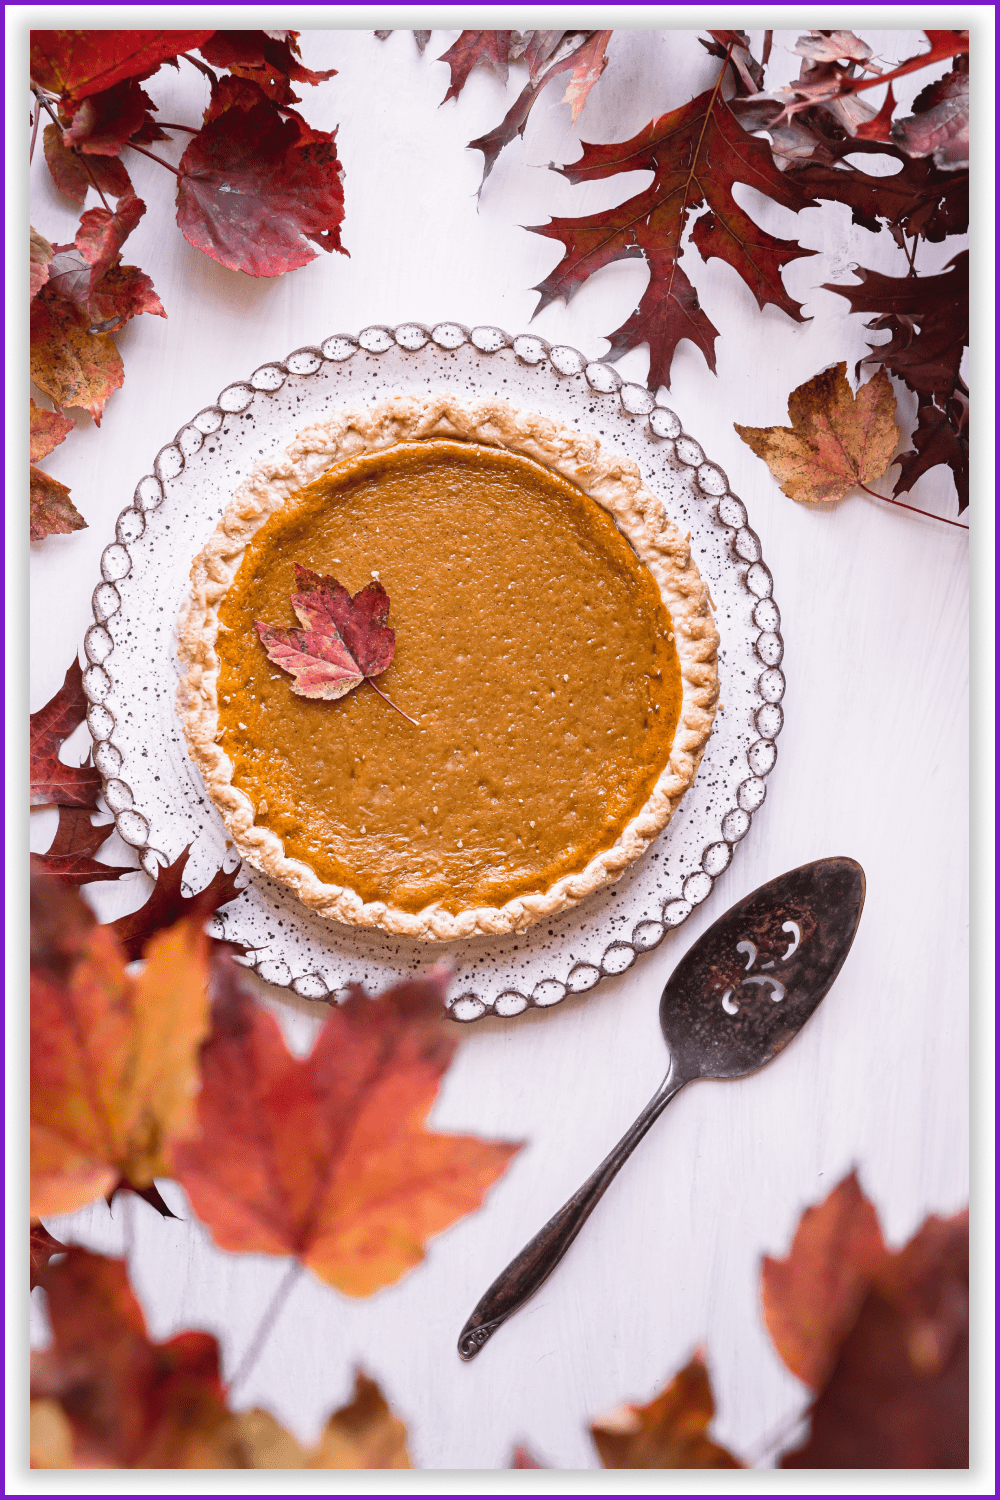 Pumpkin pie on a plate framed with yellow leaves.